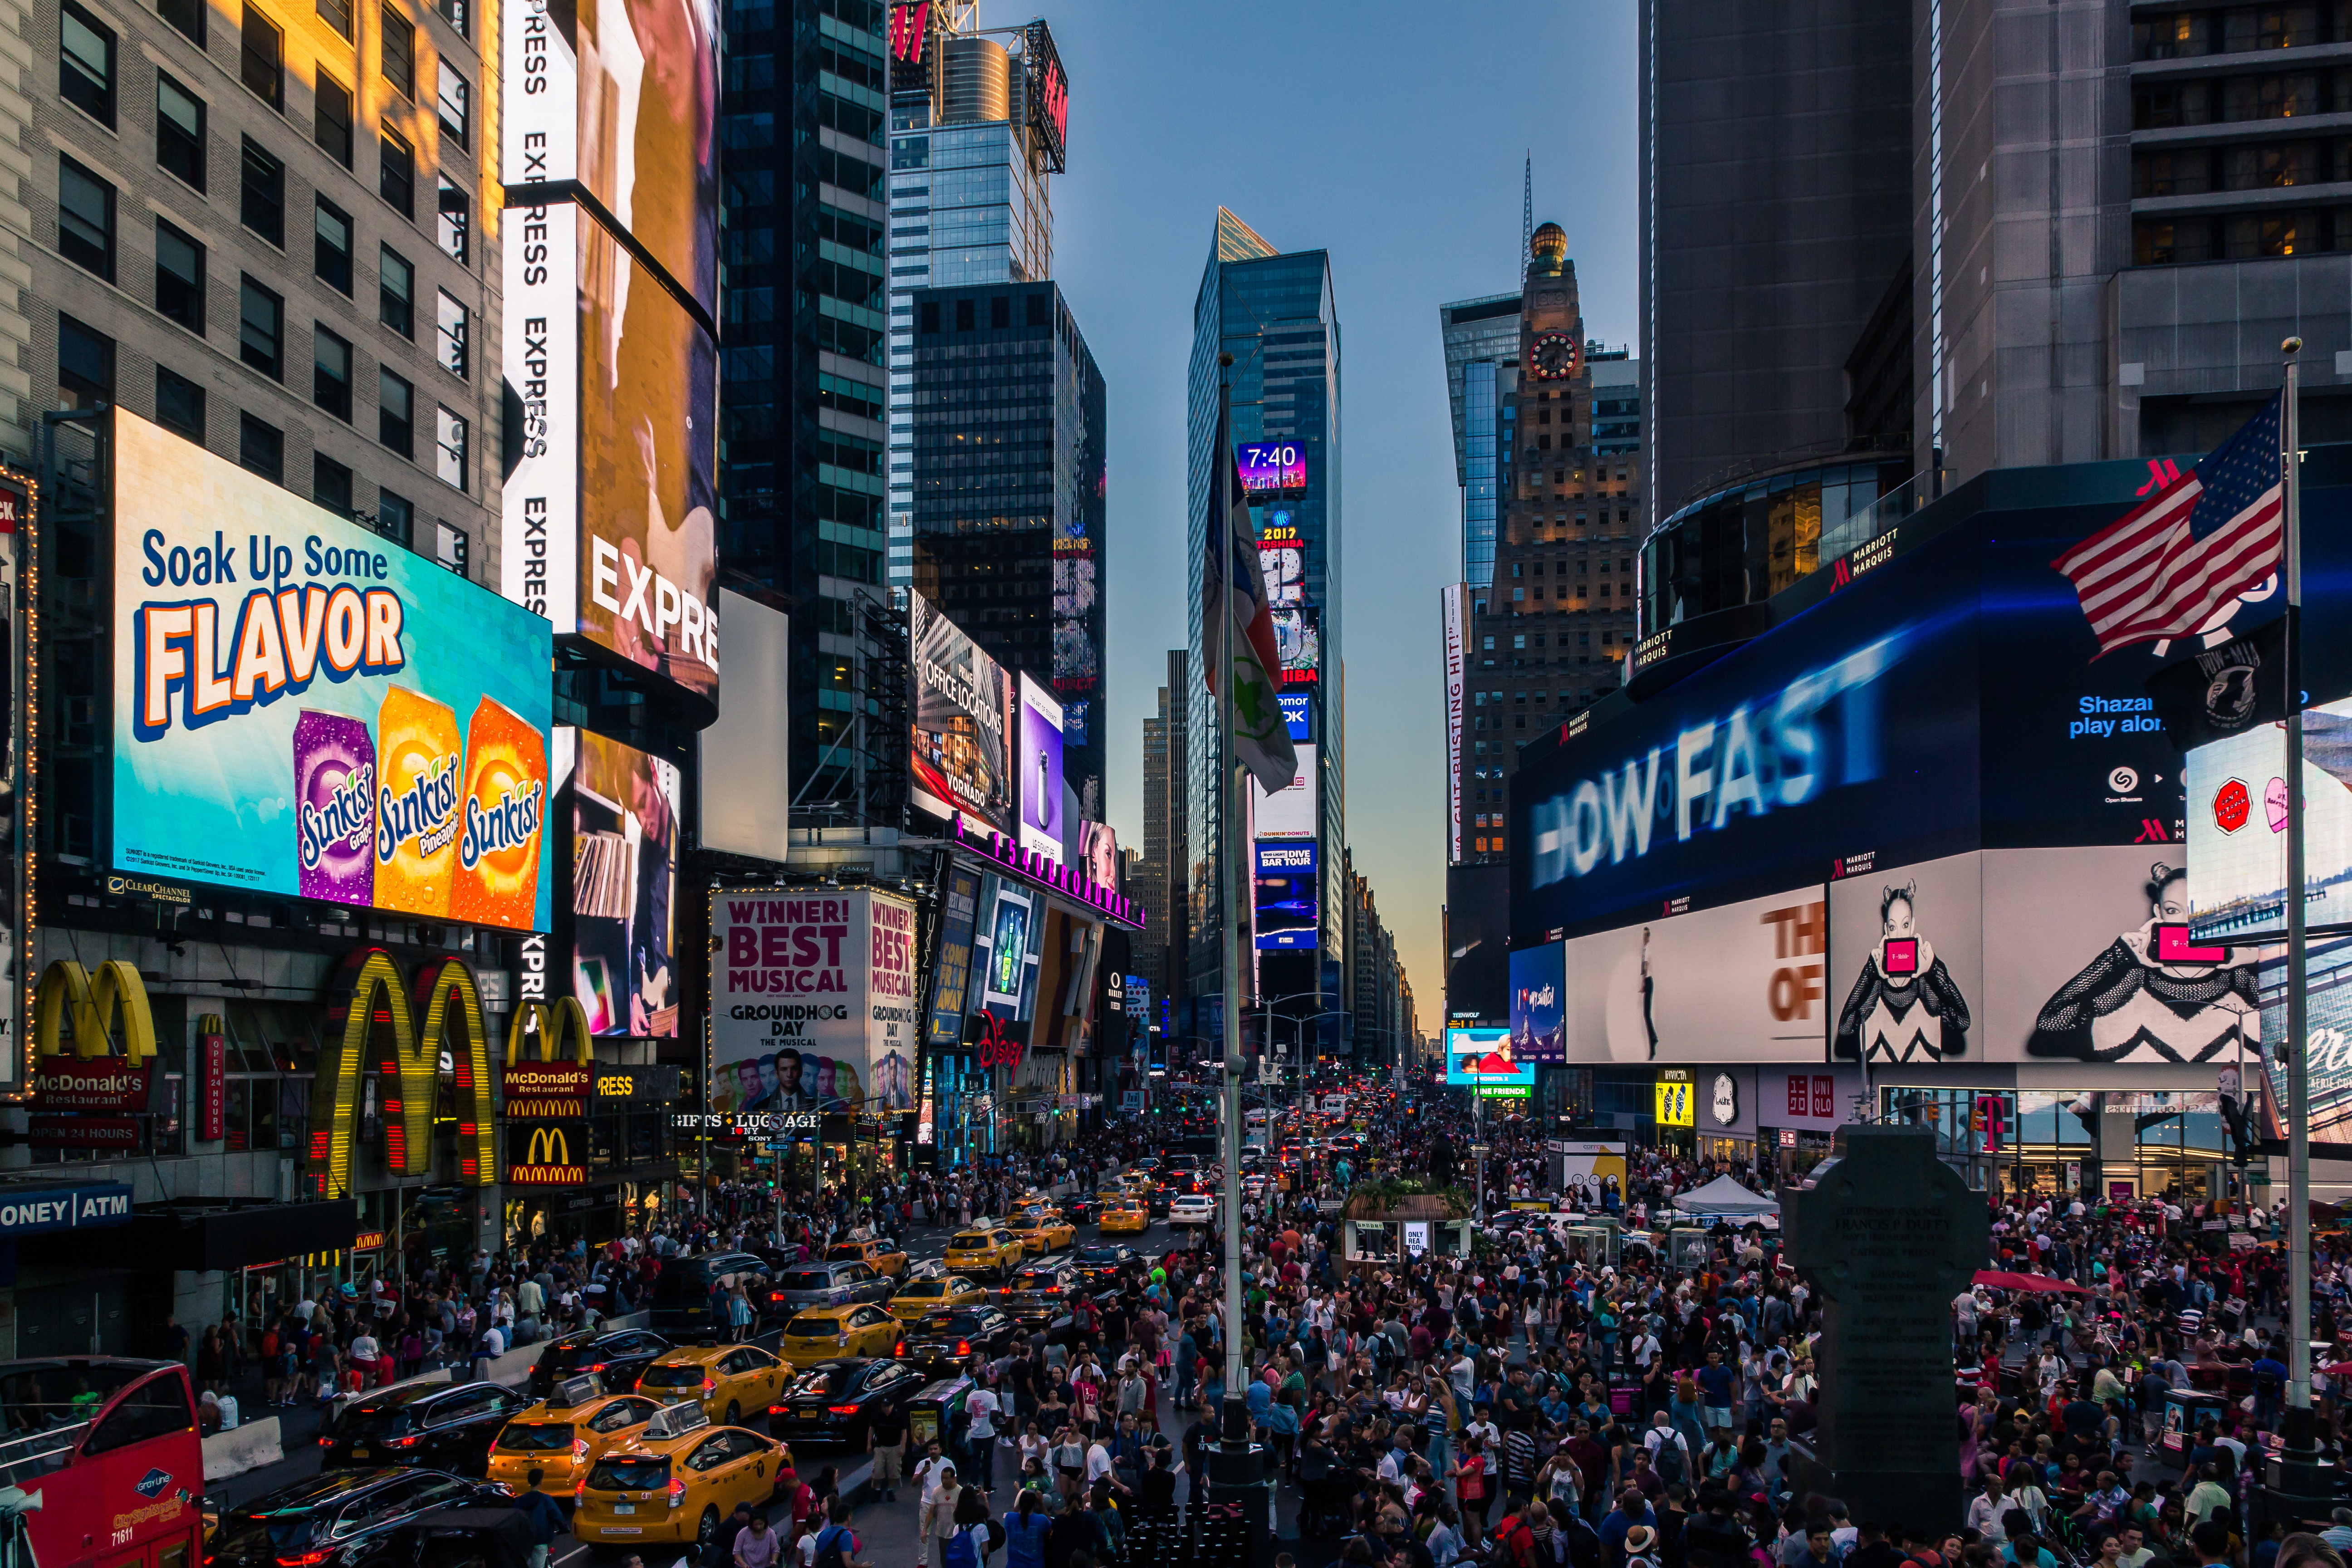 Crowds and traffic in Times Square